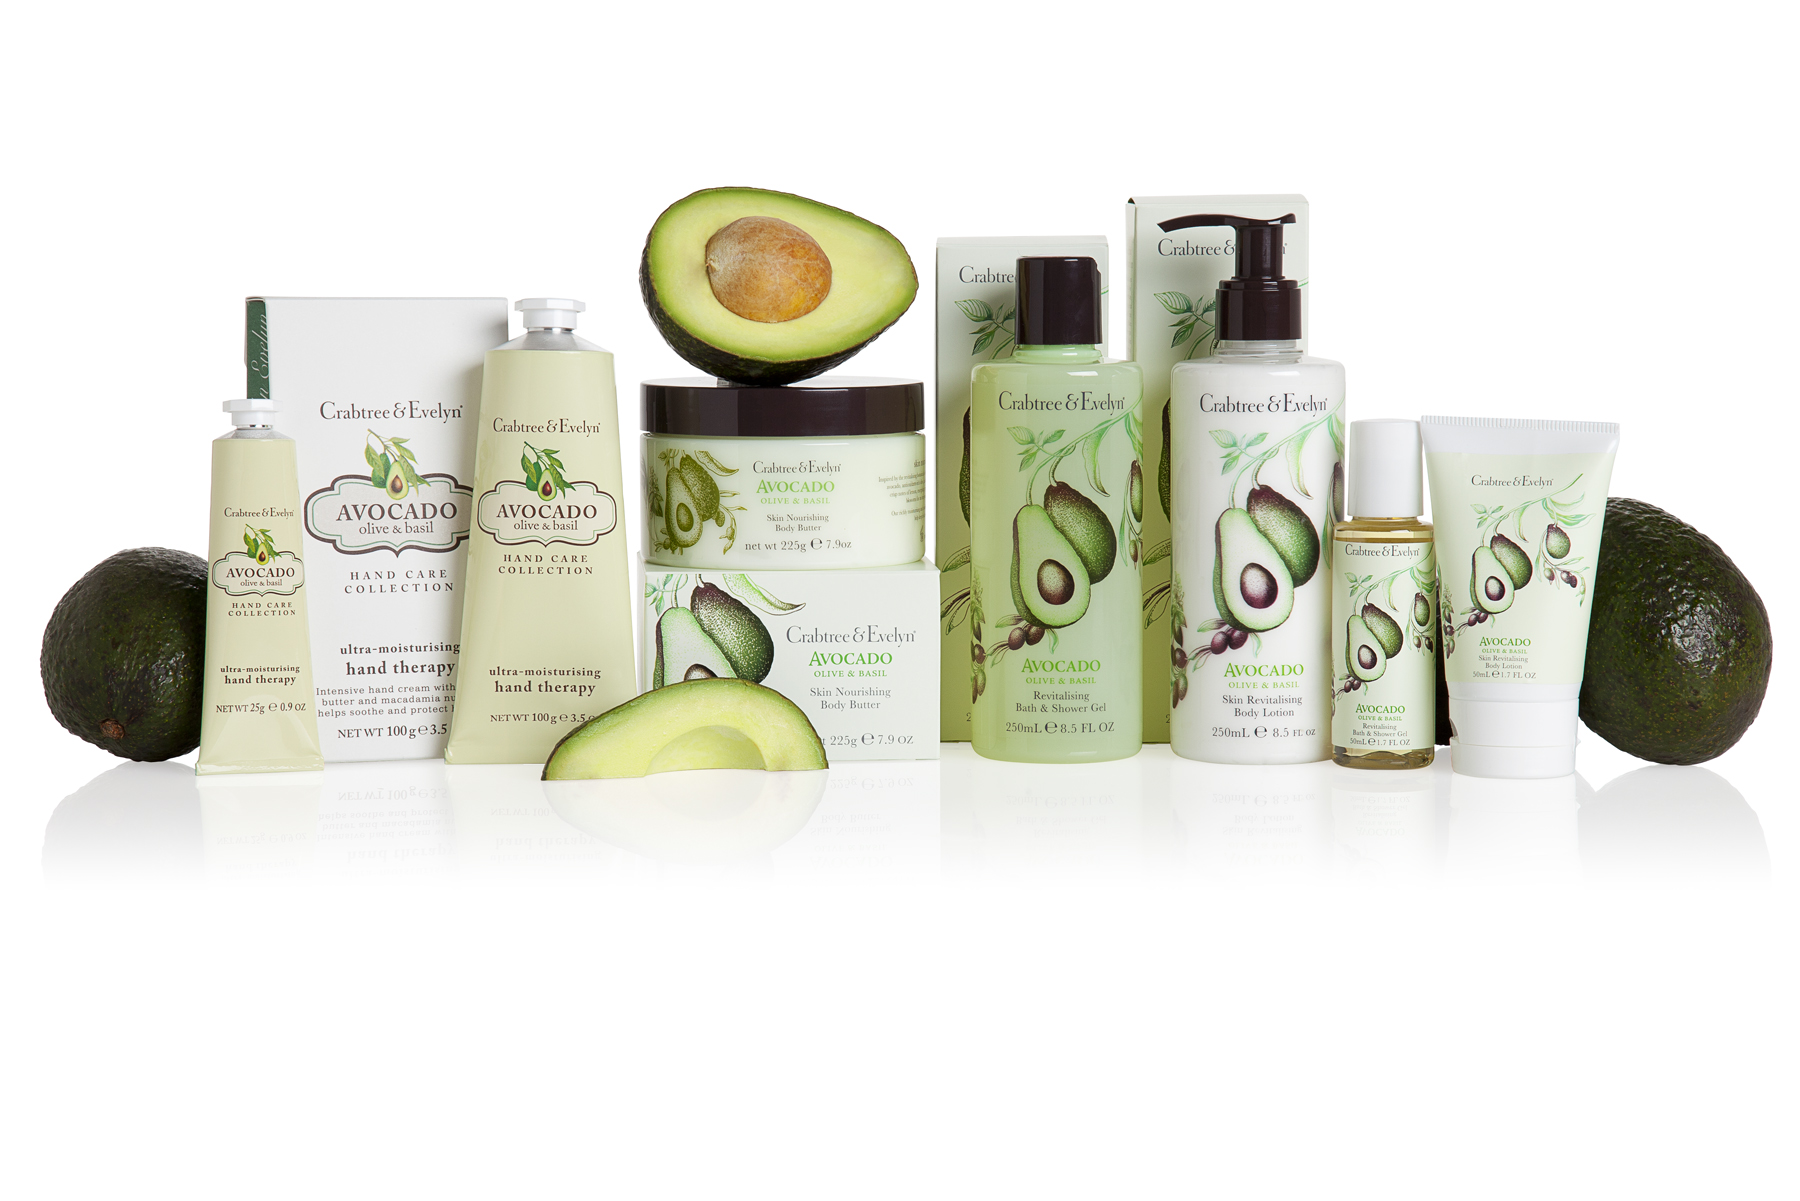 Crabtree & Evelyn New Avocado, Olive & Basil Body and Hand Care Collection  | SUPERADRIANME.com